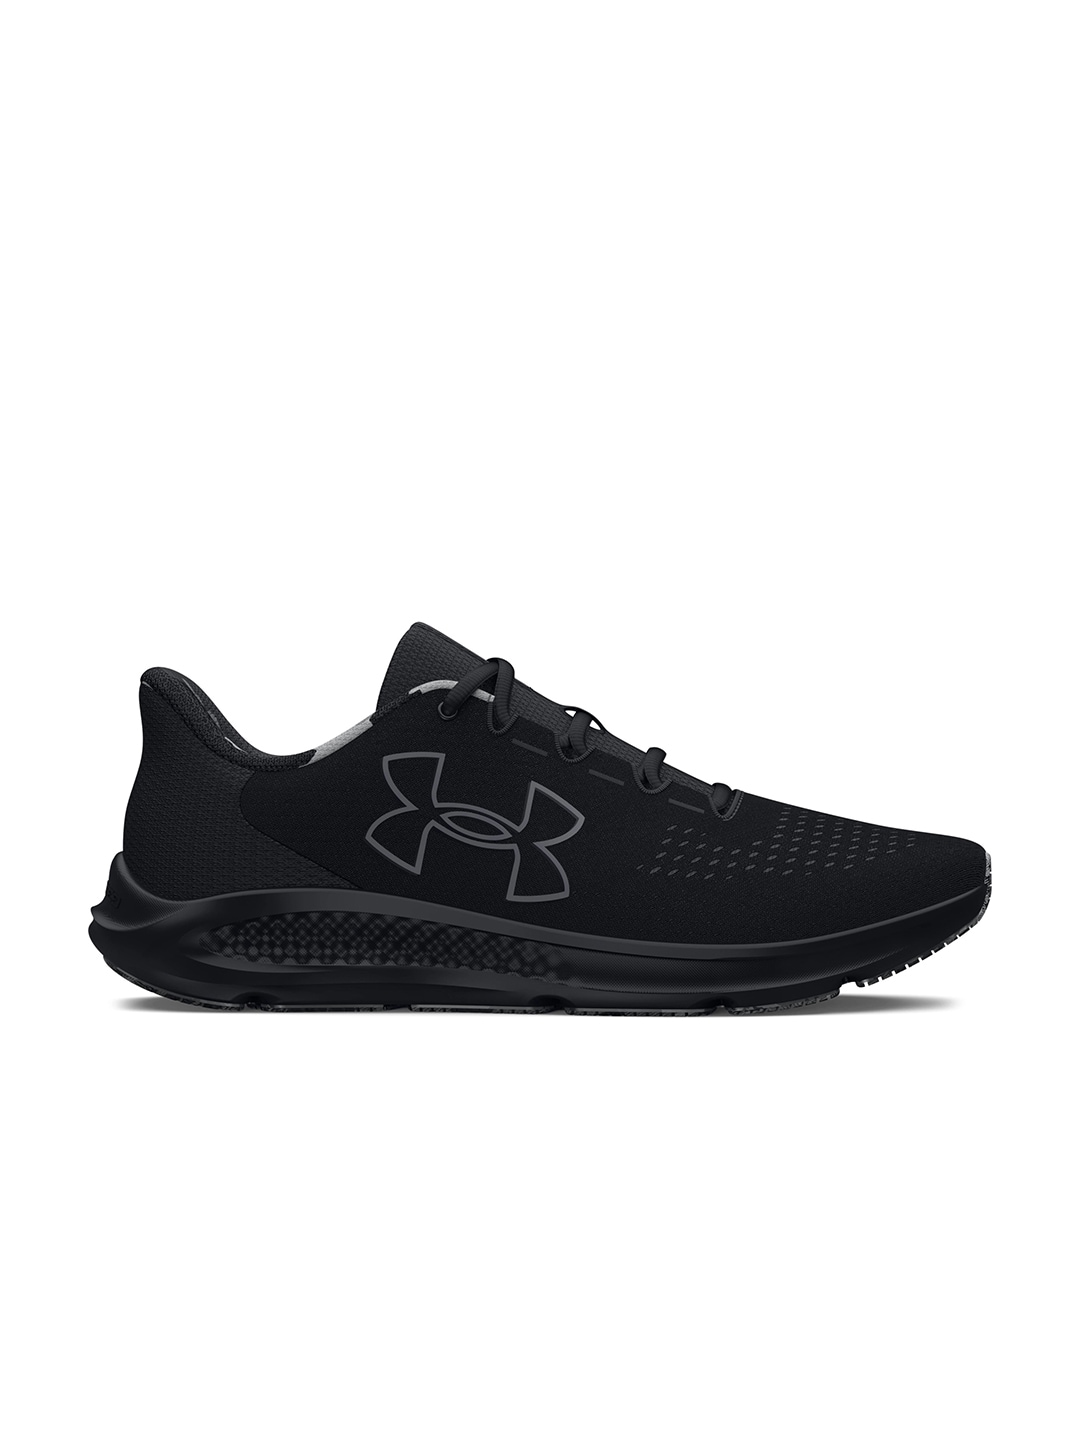 UNDER ARMOUR Men Woven Design Charged Pursuit 3 BL Camo Running Shoes